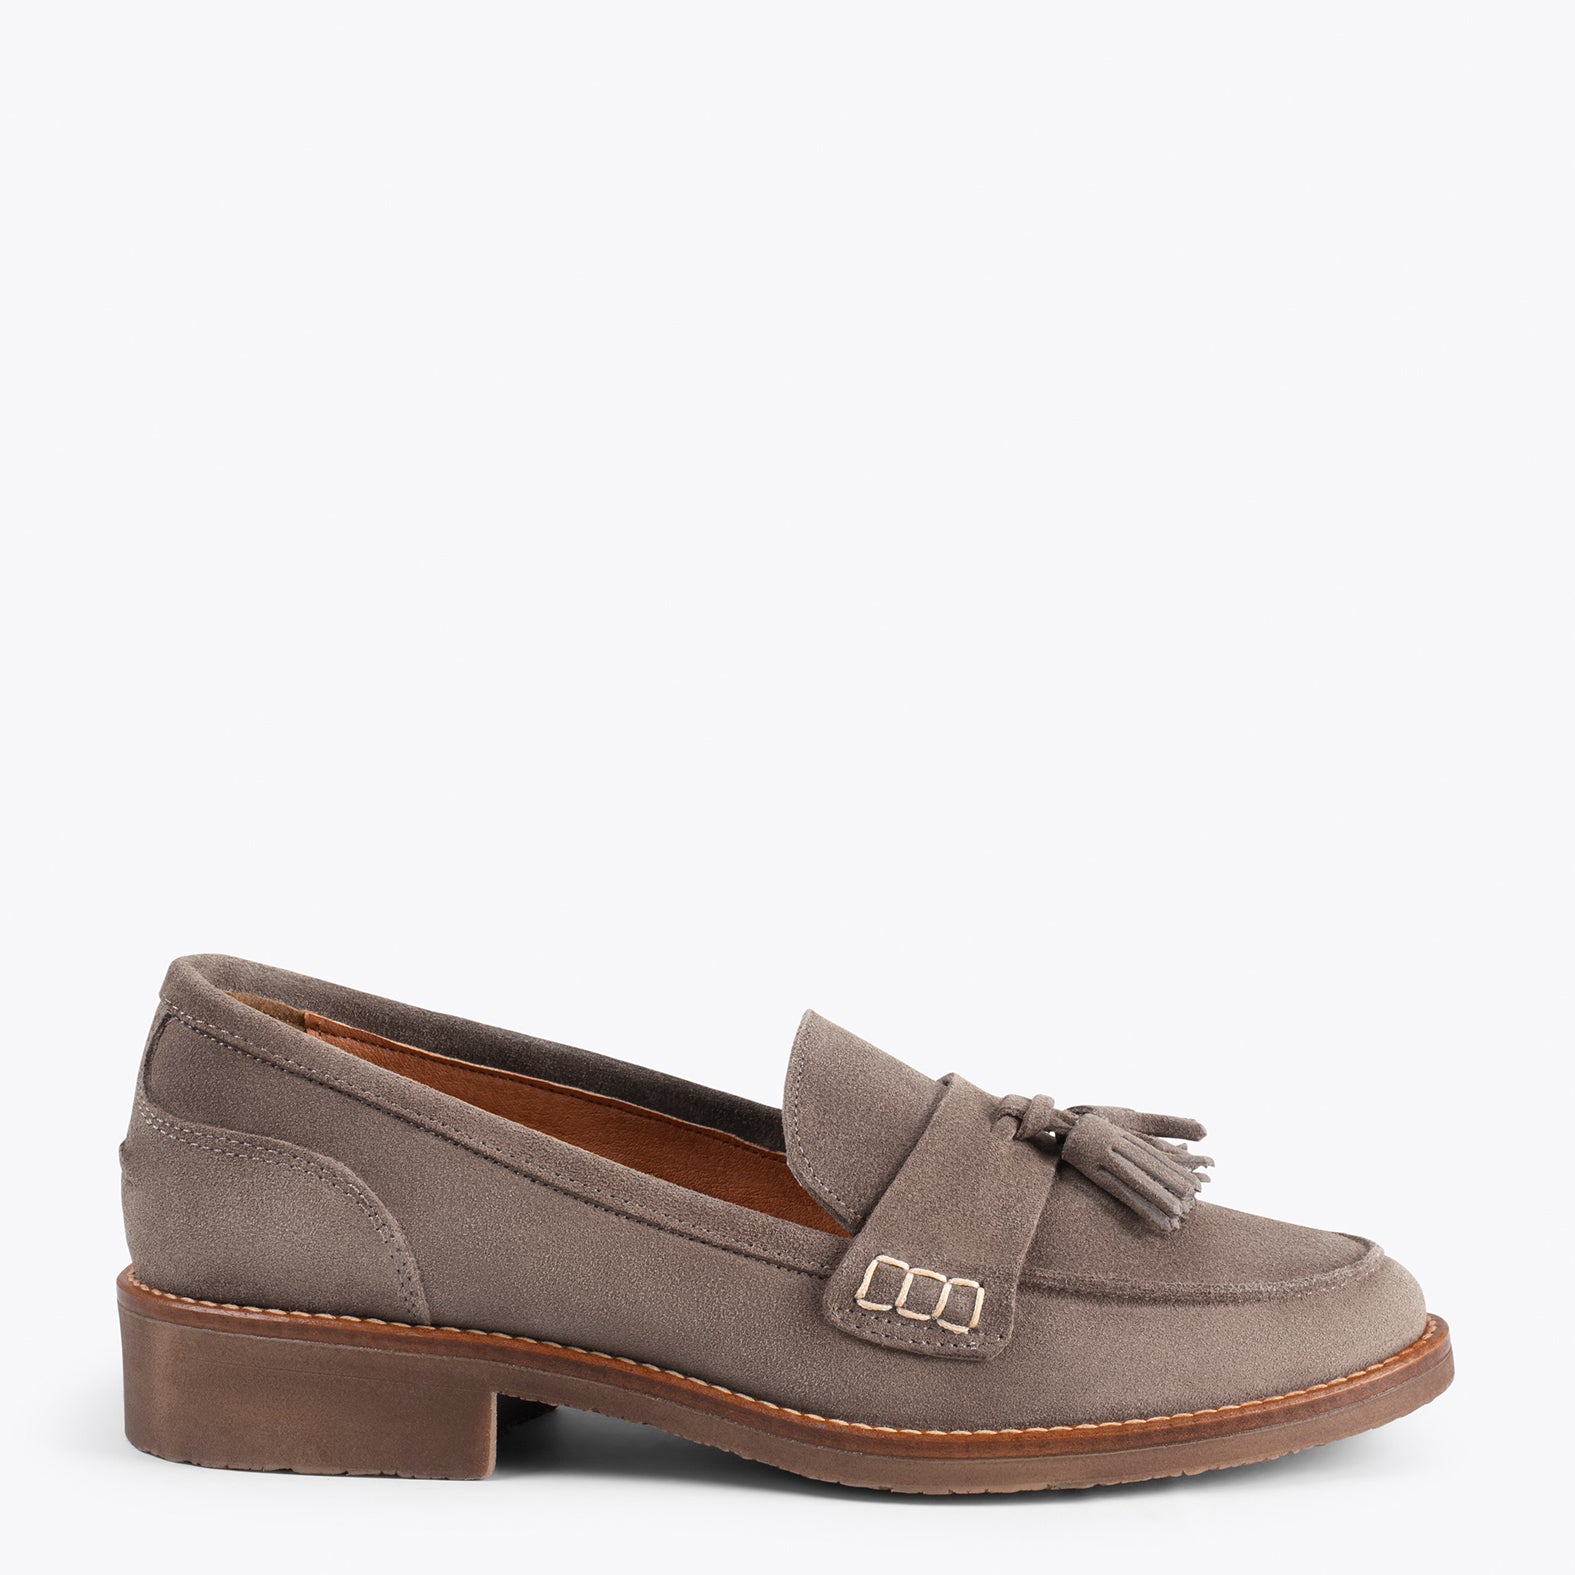 CASTELLANO – TAUPE moccasin with tassel